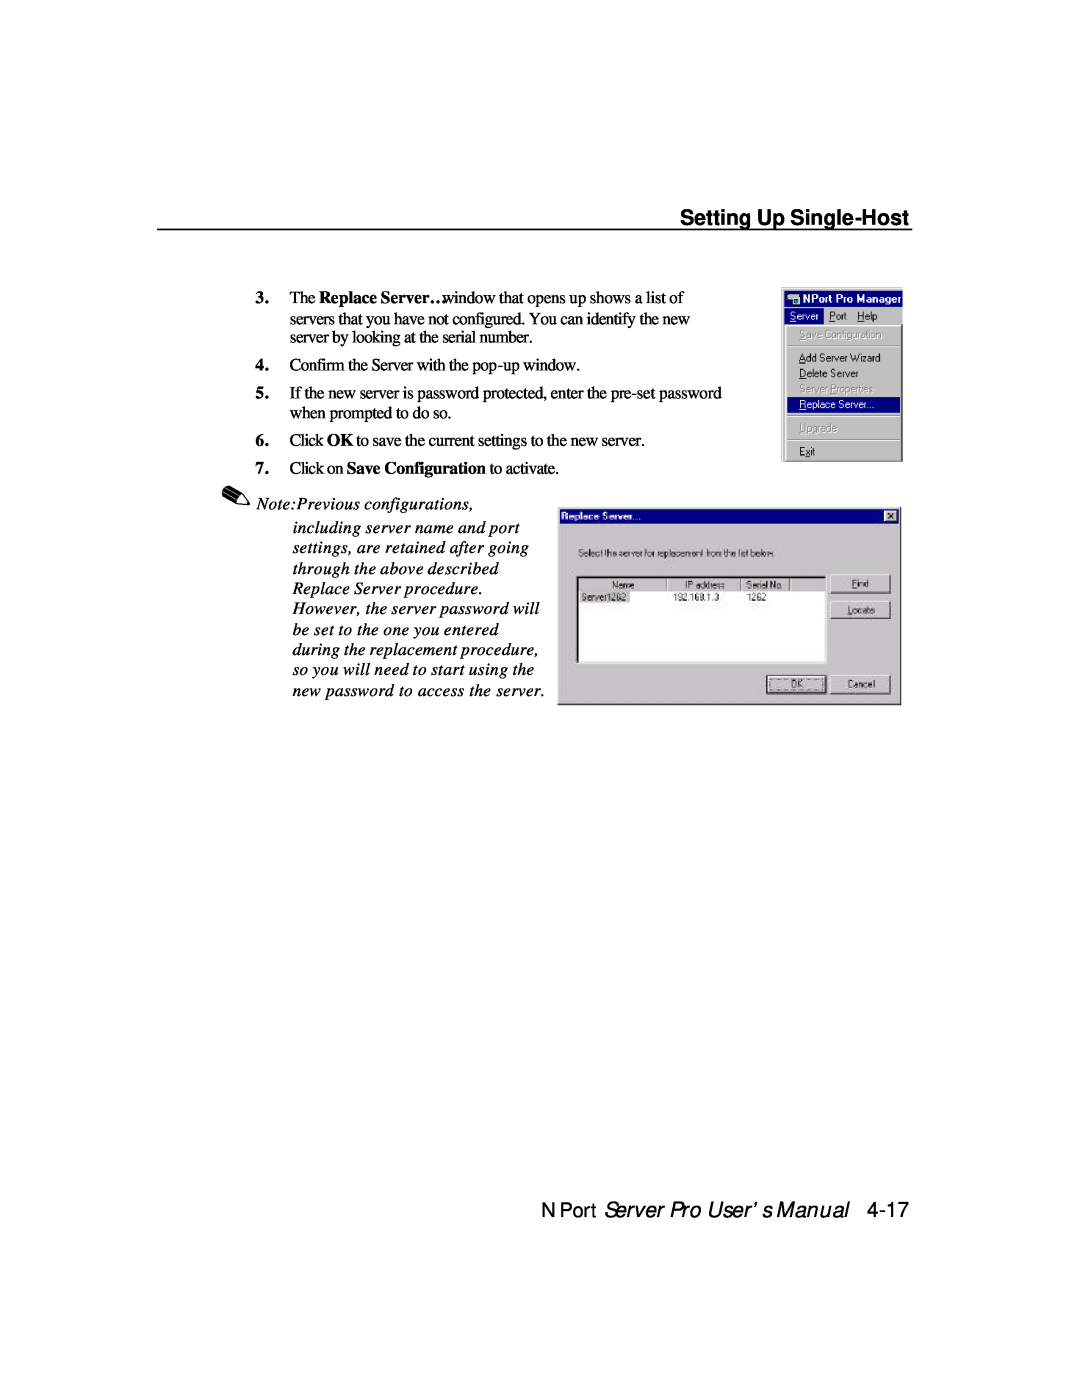 Moxa Technologies DE-308 Setting Up Single-Host, NPort Server Pro User’s Manual, Confirm the Server with the pop-up window 